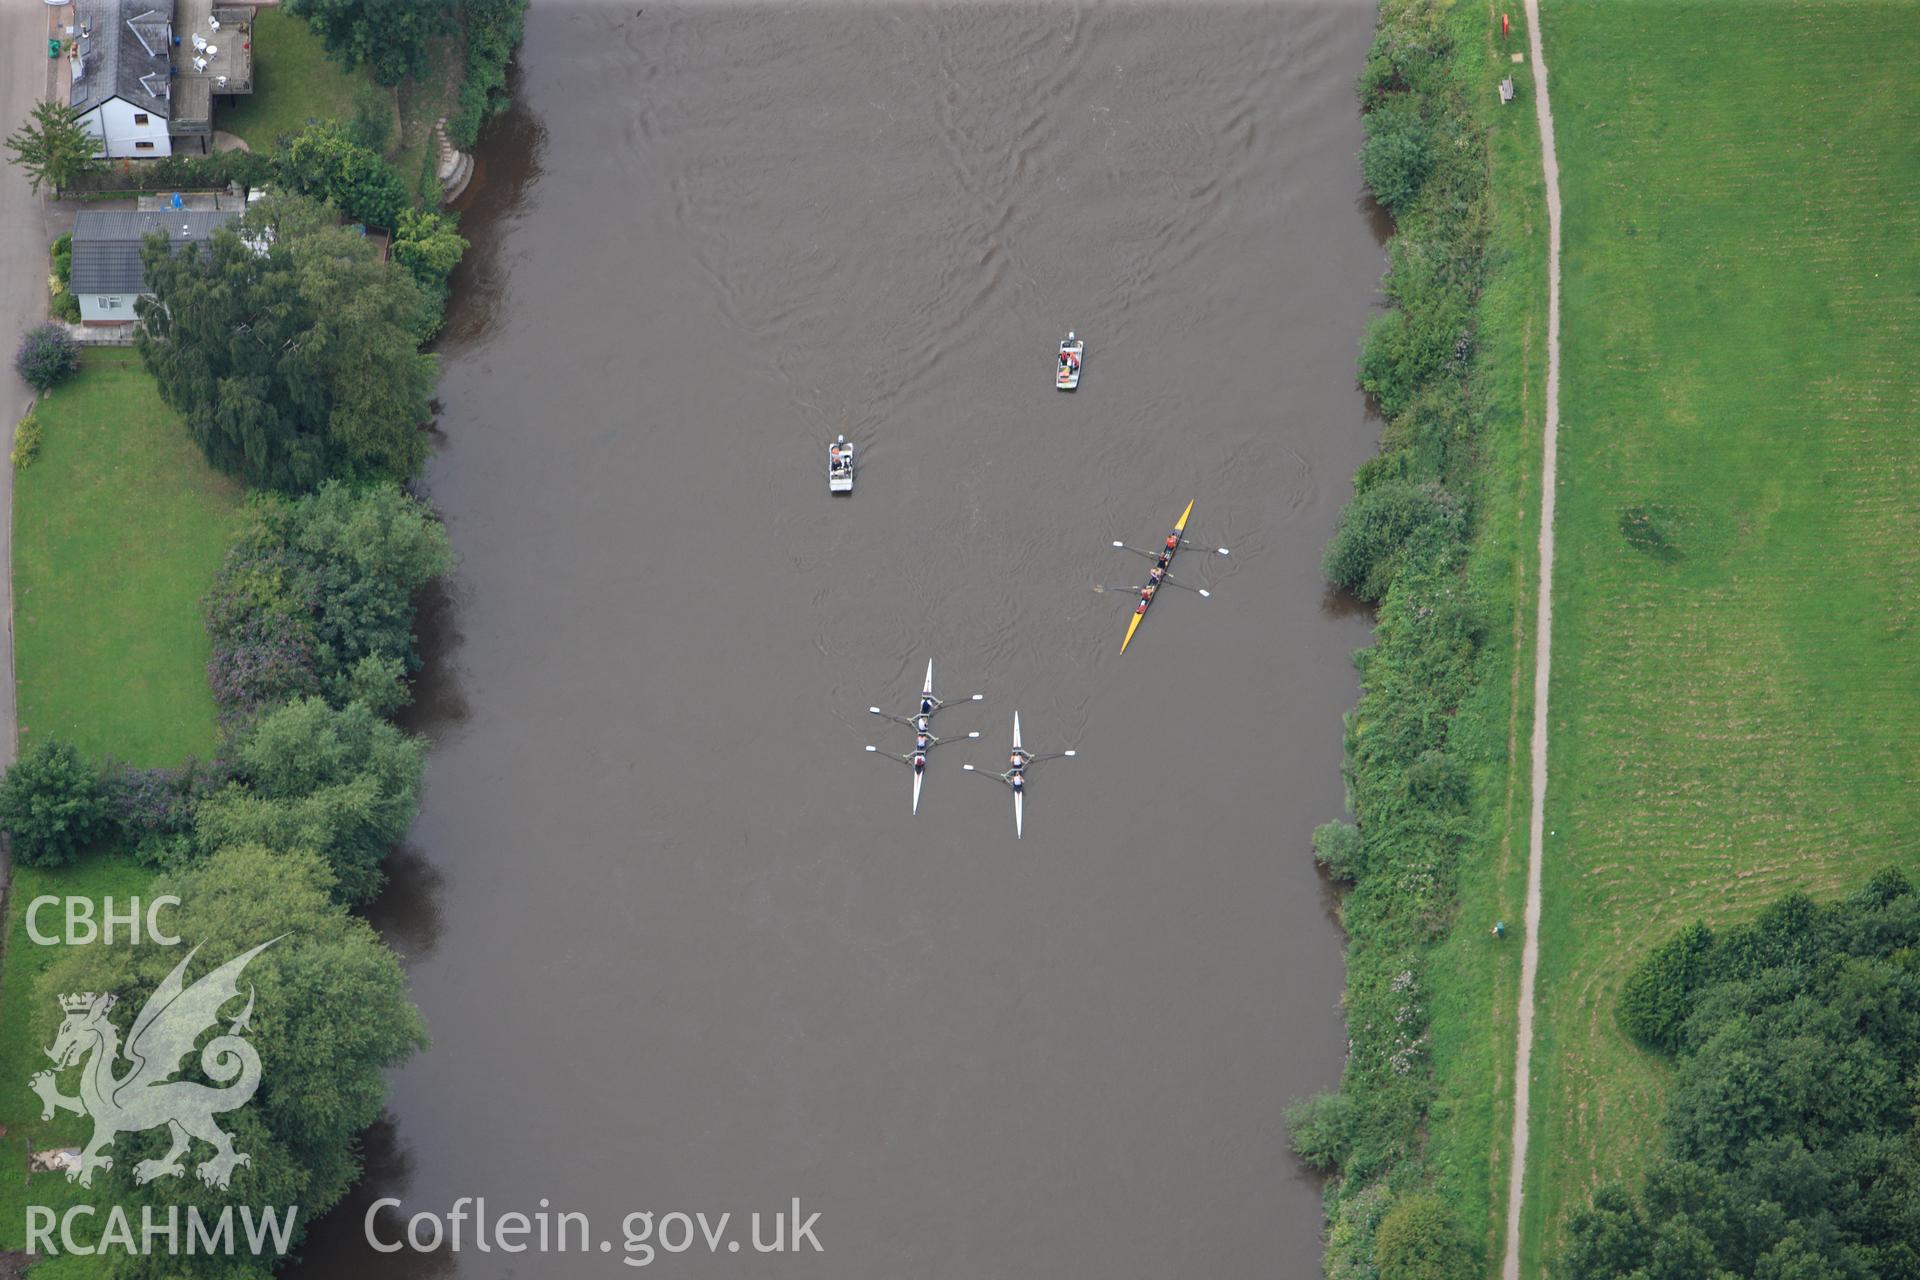 RCAHMW colour oblique photograph of Monmouth, rowers on the River Wye. Taken by Toby Driver on 20/07/2011.